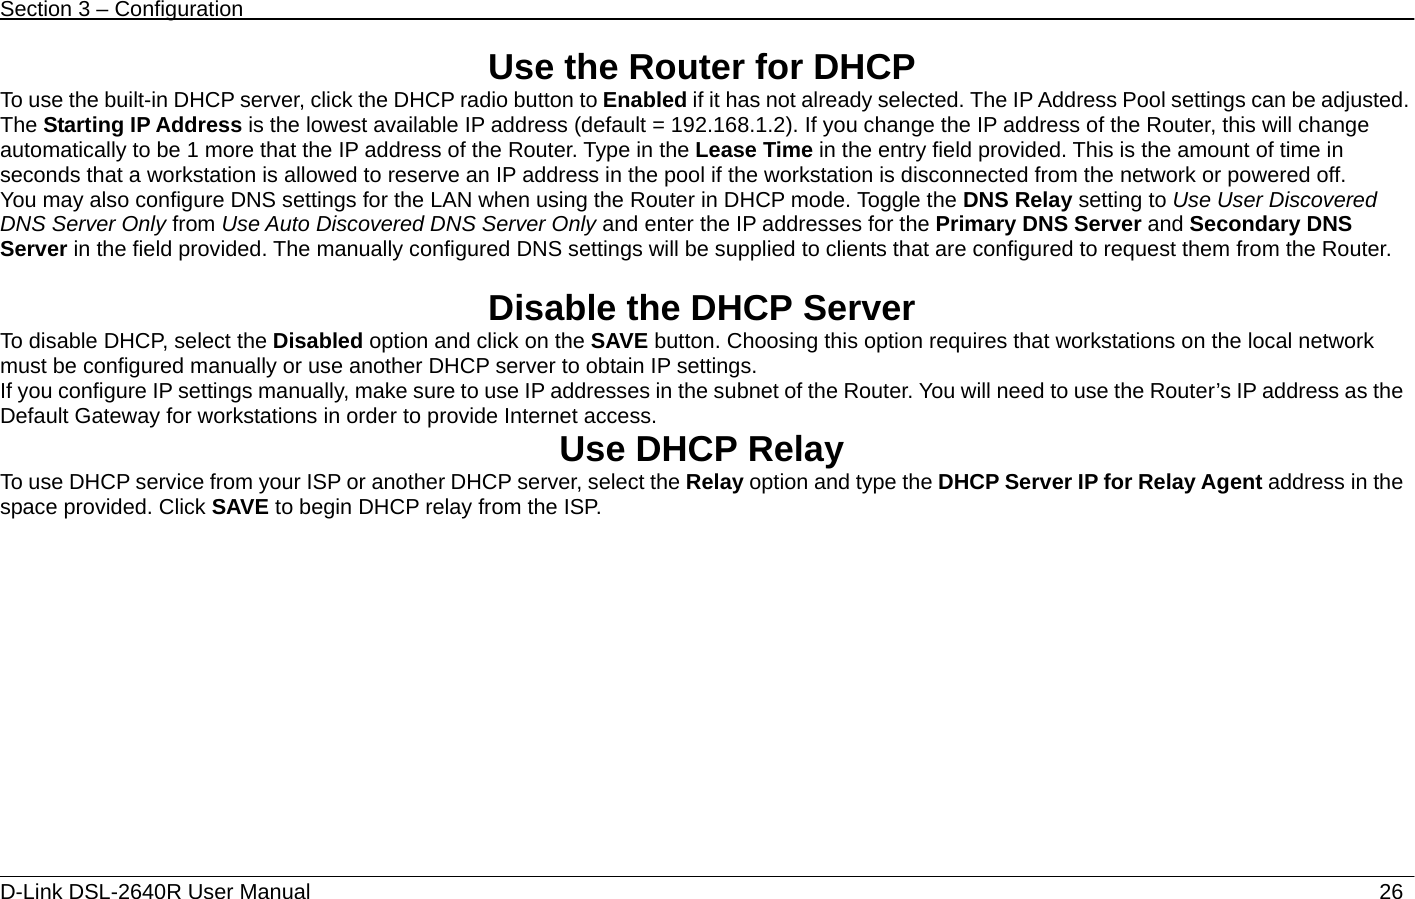 Section 3 – Configuration   D-Link DSL-2640R User Manual                           26Use the Router for DHCP To use the built-in DHCP server, click the DHCP radio button to Enabled if it has not already selected. The IP Address Pool settings can be adjusted. The Starting IP Address is the lowest available IP address (default = 192.168.1.2). If you change the IP address of the Router, this will change automatically to be 1 more that the IP address of the Router. Type in the Lease Time in the entry field provided. This is the amount of time in seconds that a workstation is allowed to reserve an IP address in the pool if the workstation is disconnected from the network or powered off.     You may also configure DNS settings for the LAN when using the Router in DHCP mode. Toggle the DNS Relay setting to Use User Discovered DNS Server Only from Use Auto Discovered DNS Server Only and enter the IP addresses for the Primary DNS Server and Secondary DNS Server in the field provided. The manually configured DNS settings will be supplied to clients that are configured to request them from the Router.  Disable the DHCP Server To disable DHCP, select the Disabled option and click on the SAVE button. Choosing this option requires that workstations on the local network must be configured manually or use another DHCP server to obtain IP settings.   If you configure IP settings manually, make sure to use IP addresses in the subnet of the Router. You will need to use the Router’s IP address as the Default Gateway for workstations in order to provide Internet access. Use DHCP Relay To use DHCP service from your ISP or another DHCP server, select the Relay option and type the DHCP Server IP for Relay Agent address in the space provided. Click SAVE to begin DHCP relay from the ISP.  